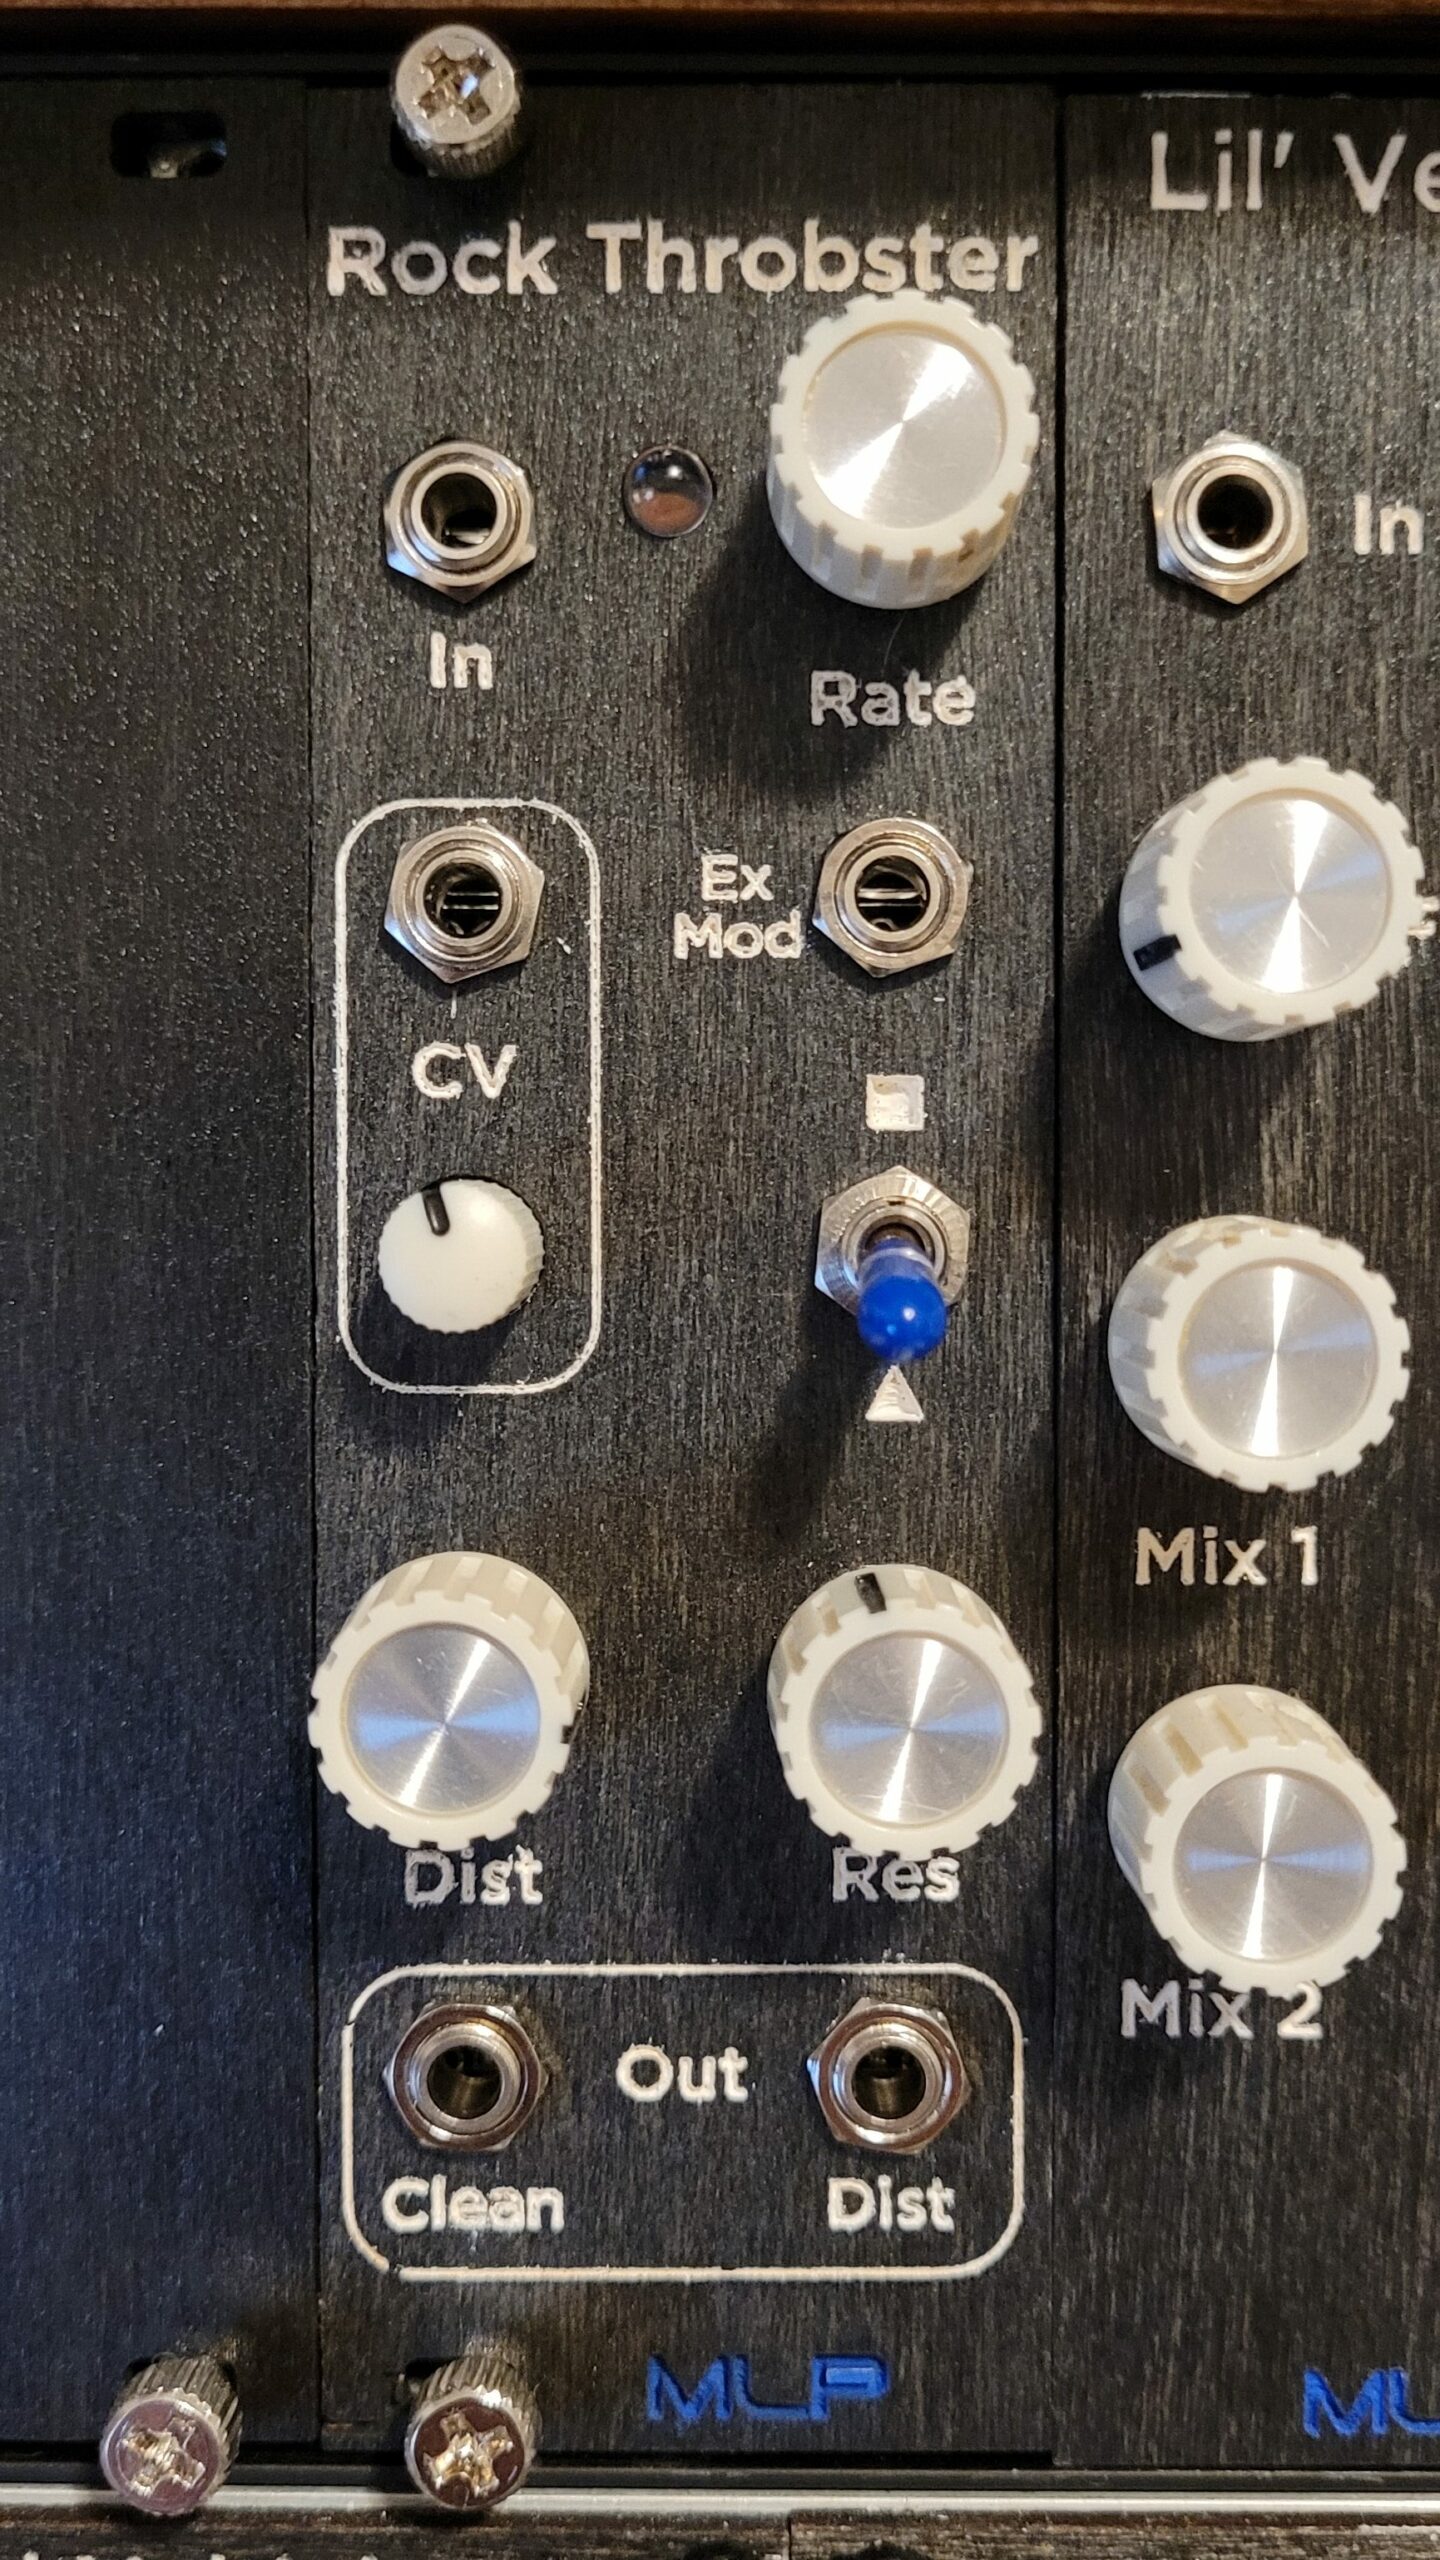 Faceplate for the Rock Throbster Eurorack tremolo module